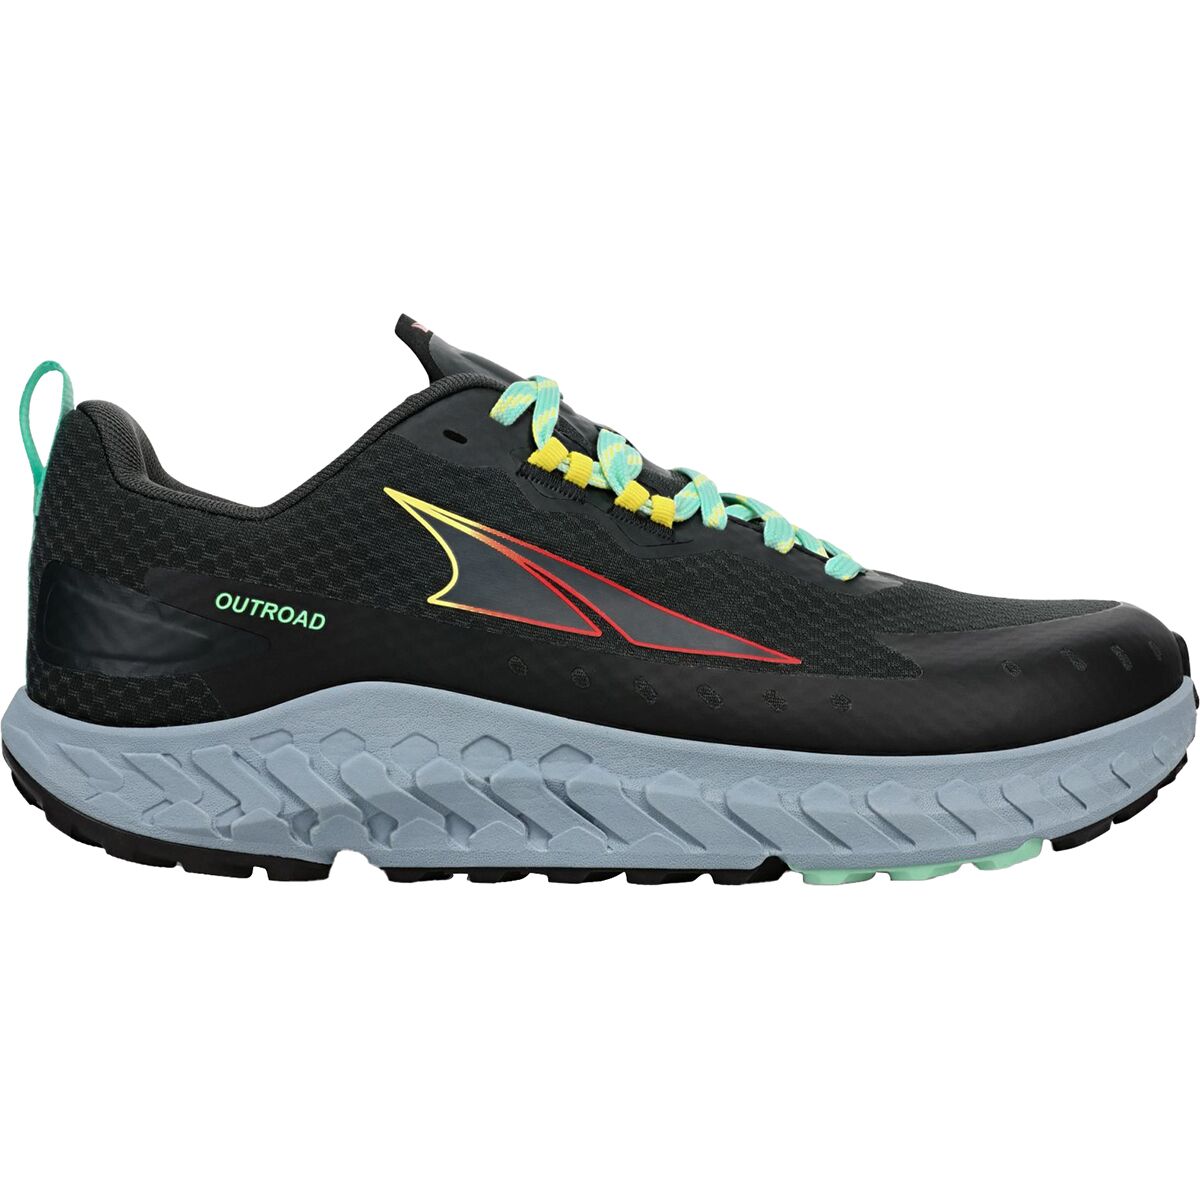 Altra Outroad Trail Running Shoe - Men's